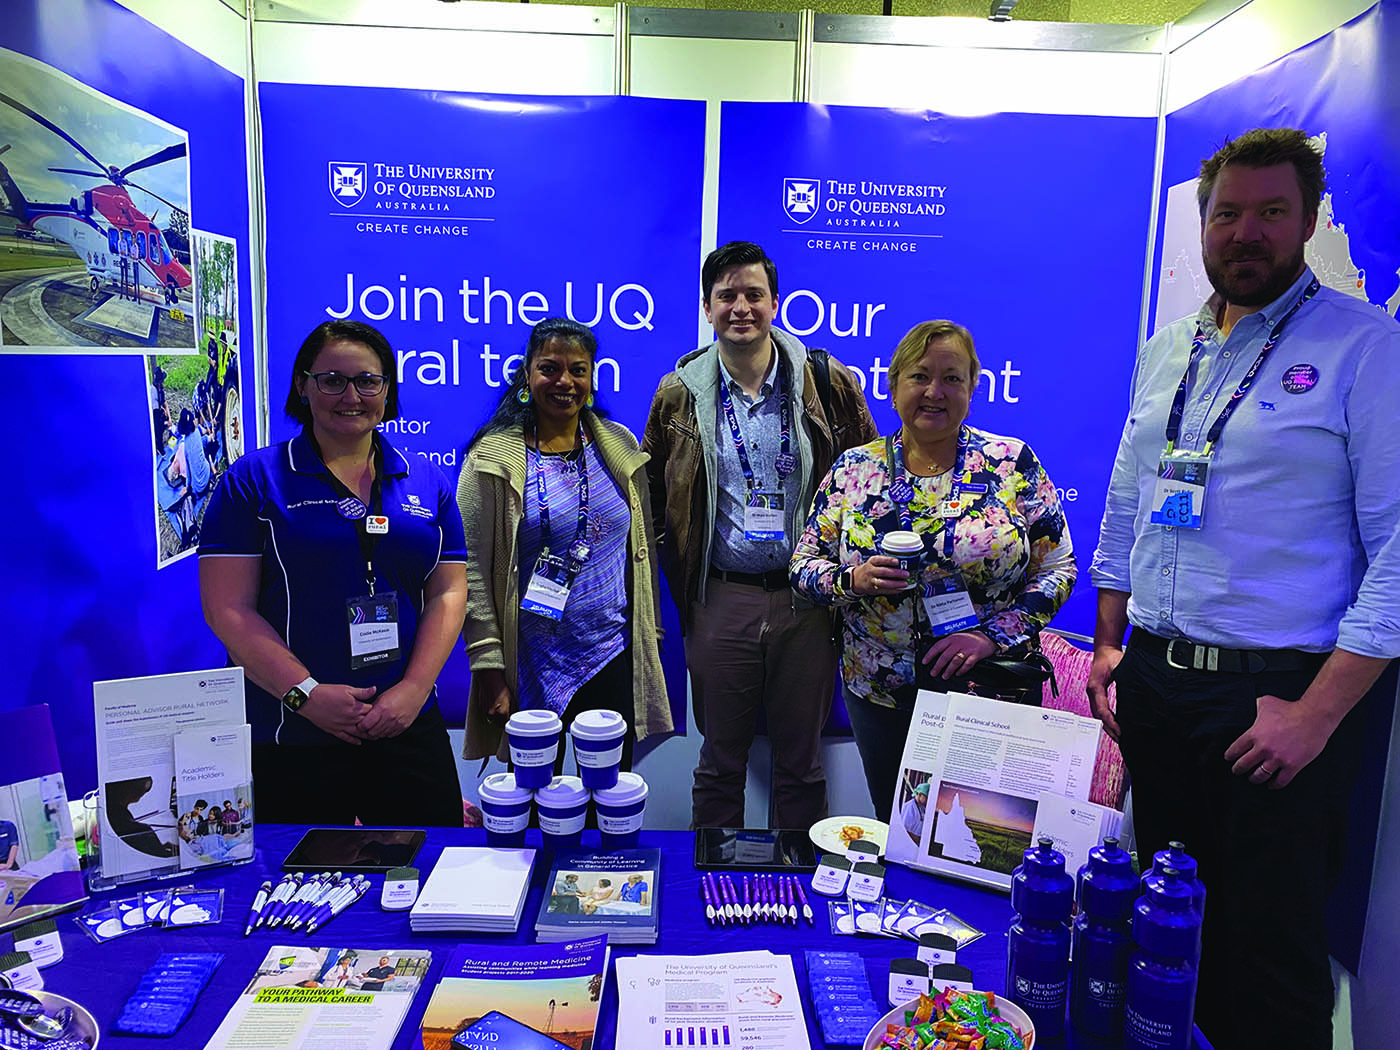 UQRCS took up Silver Sponsorship at the Rural Doctors Association Queensland Annual Conference, hosted on the Gold Coast.